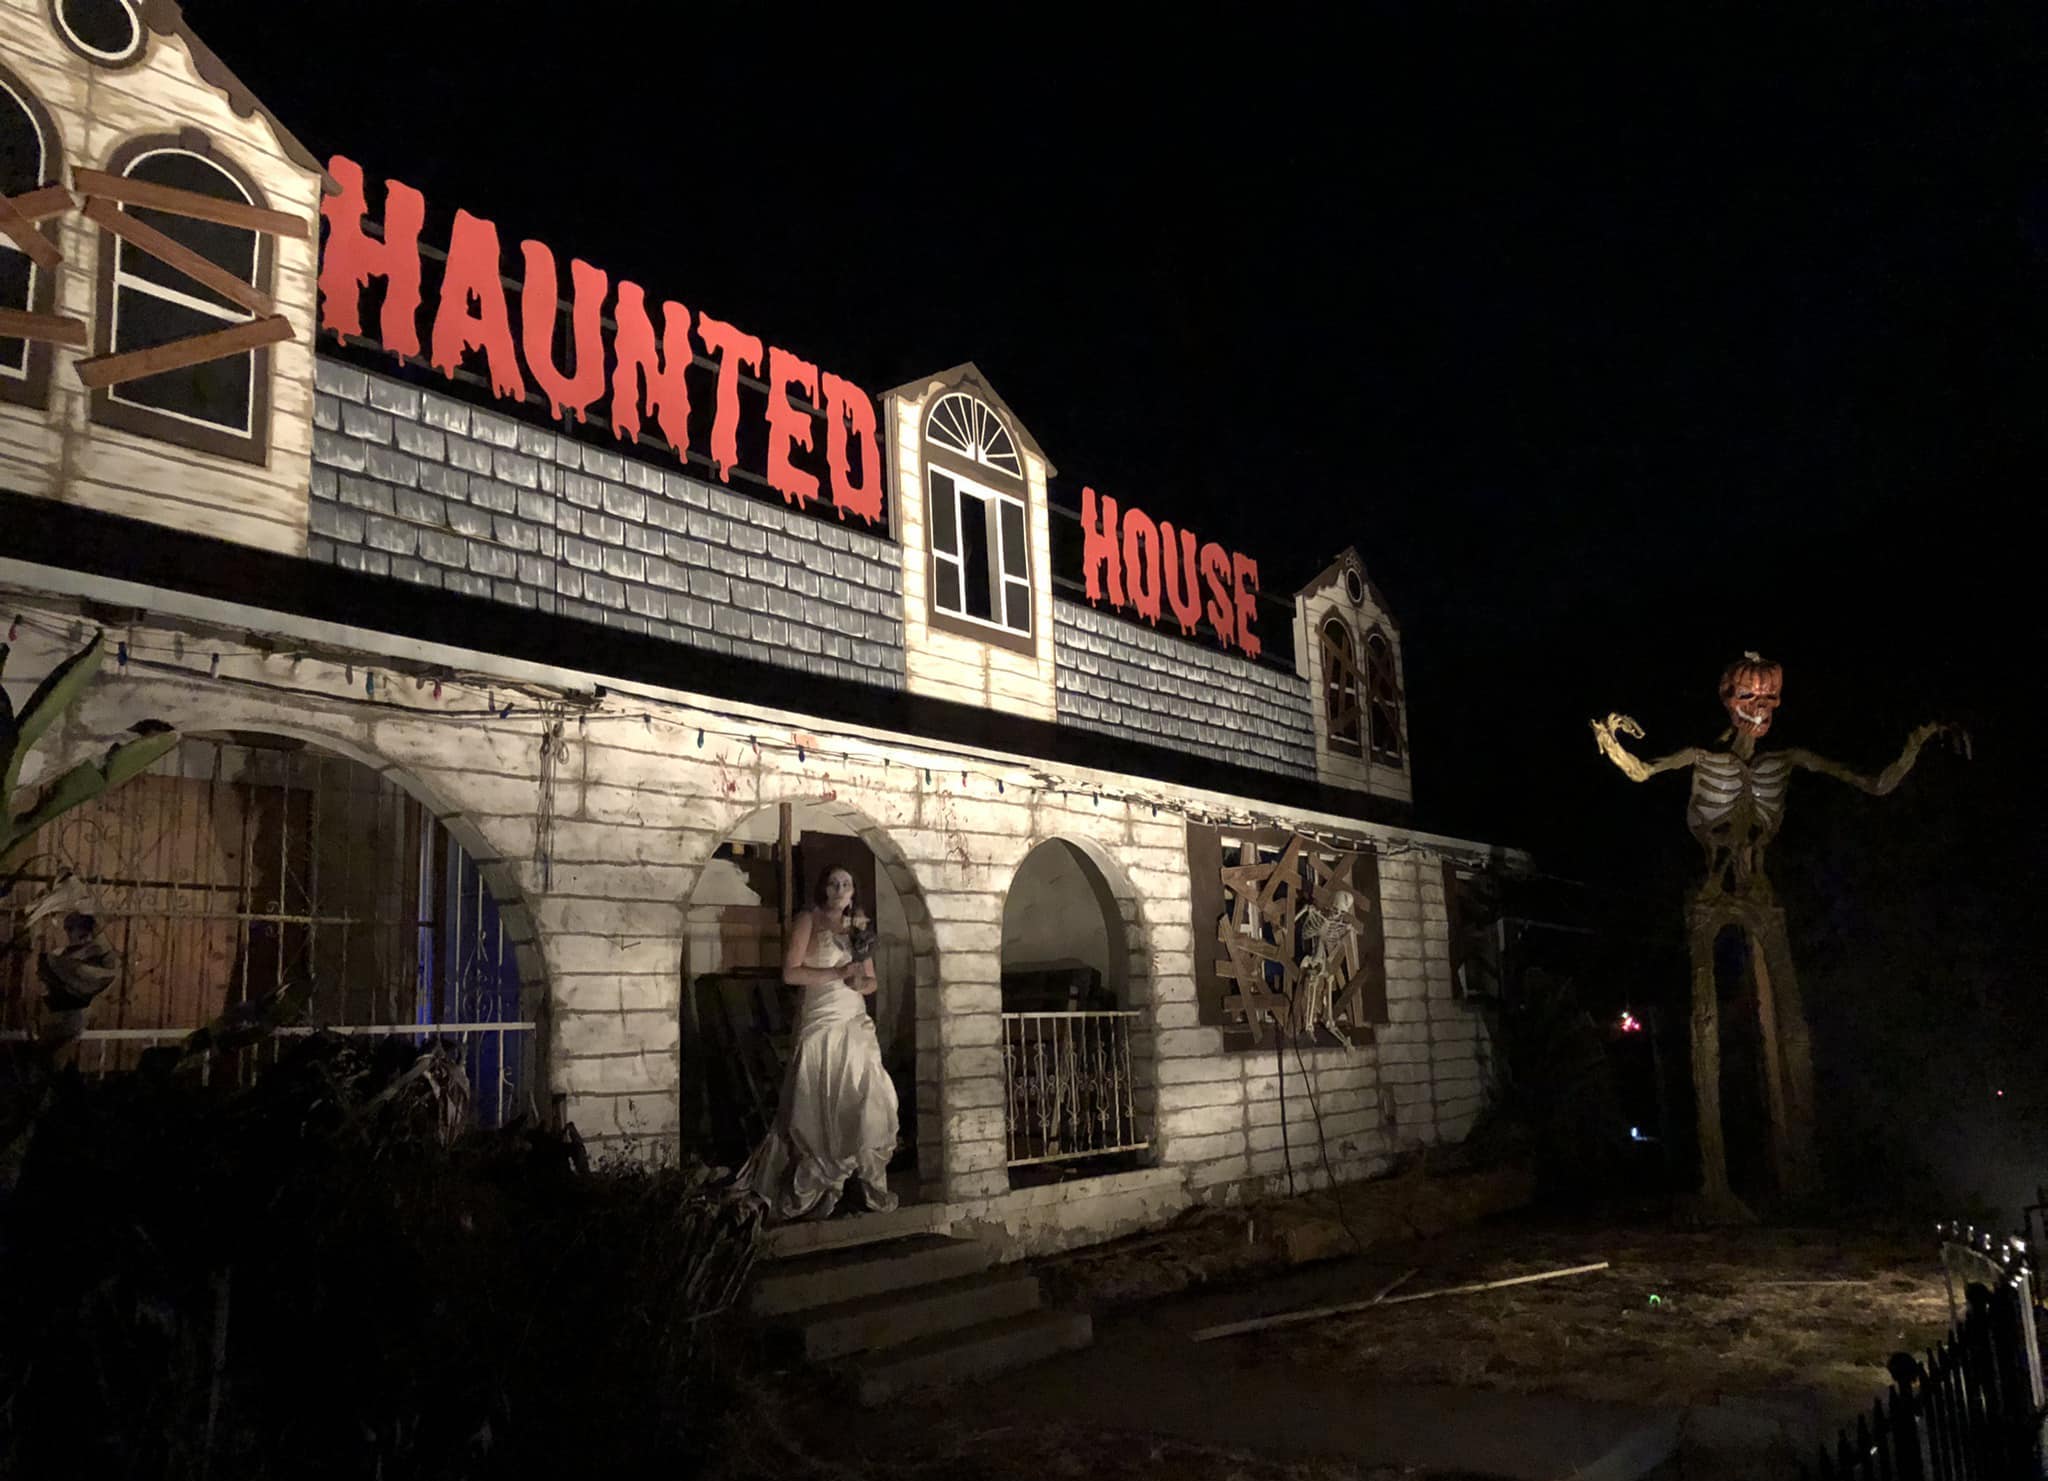 Attraction with a sign "Haunted House" at the Haunted Amusement Park or Scare Trail in San Diego